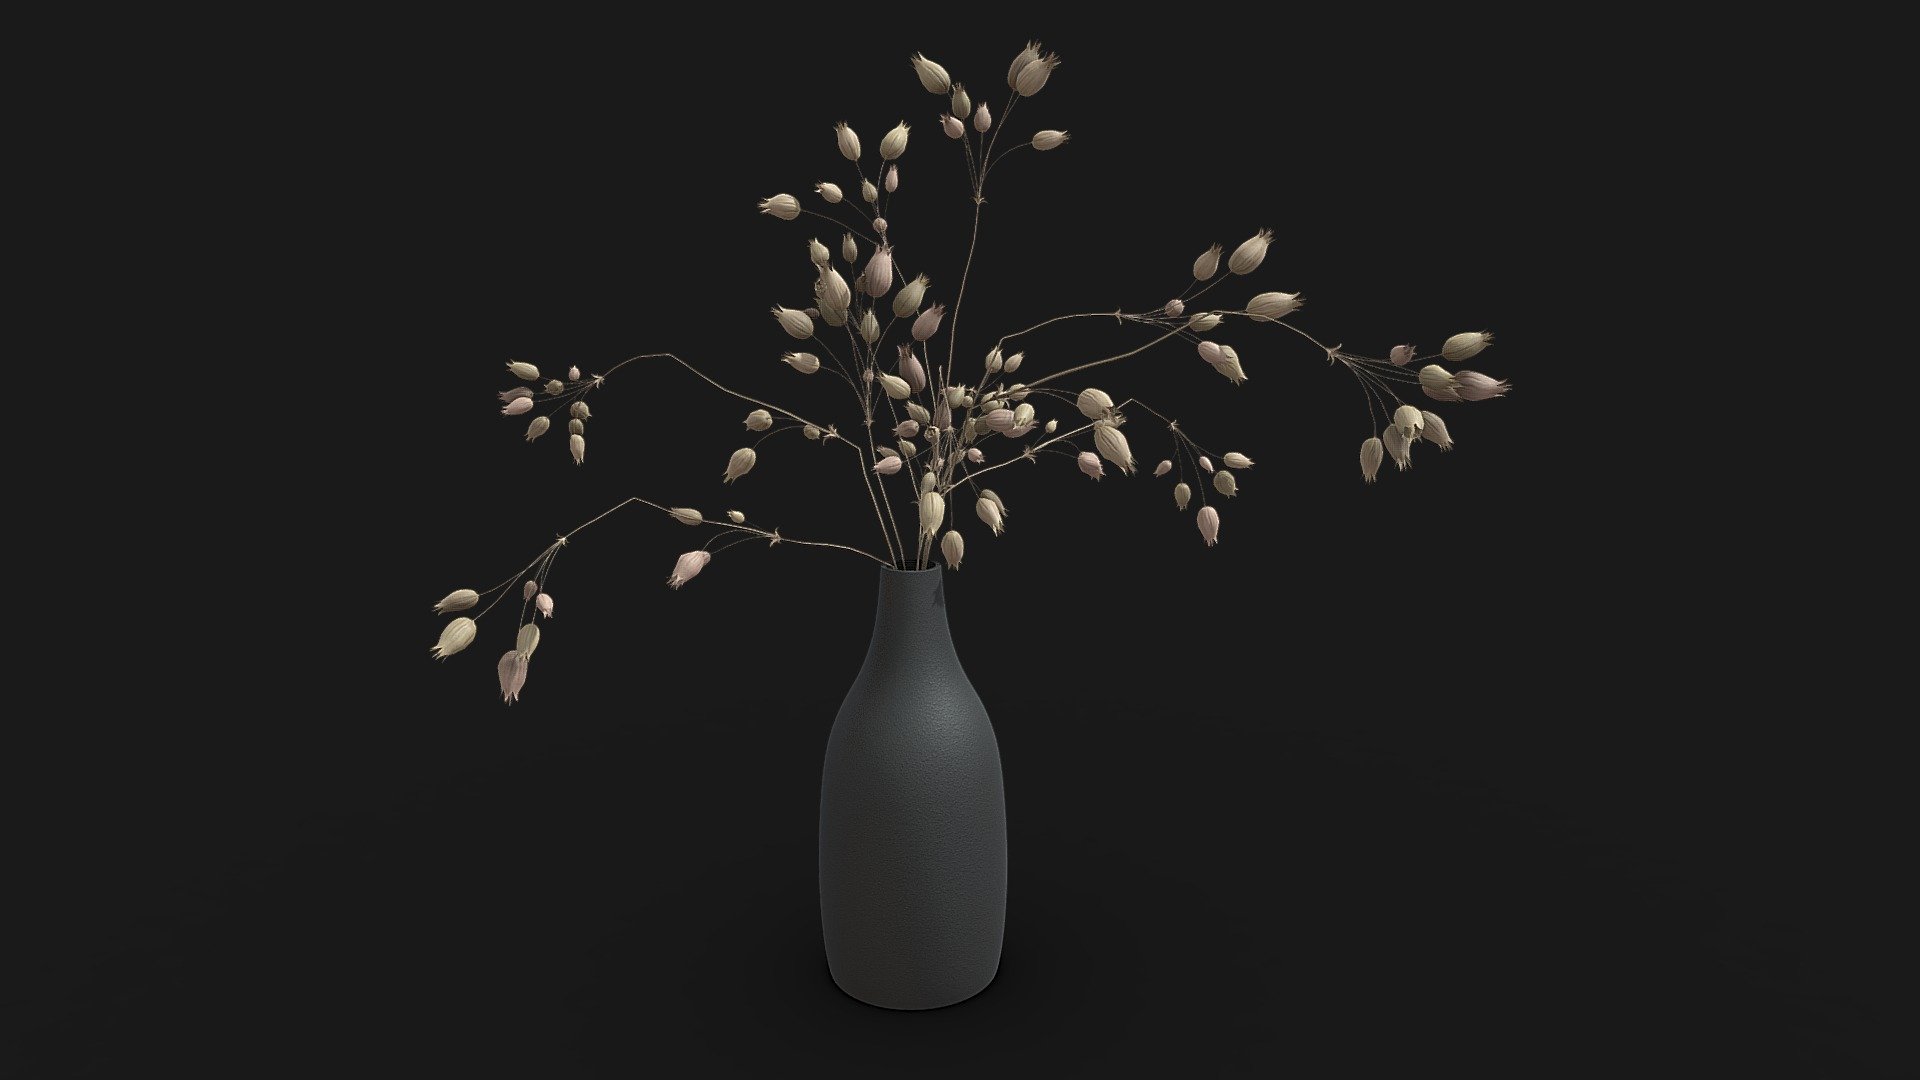 Dried grass flowers in a black ceramic vase.

Specification:




Model is in a real scale

Height: 56cm

Polygons: 49368

Verticles: 56020

Only Quads and Triangles used

Formats:




3ds max 2017 V-Ray (native)

3ds max 2017 Arnold

Cinema R20

Cinema R20 V-Ray

Blender Cycles

Unity 2020

Unreal Engine 5.1

FBX

OBJ

DWG
 - Dried Grass Flowers II - Buy Royalty Free 3D model by Fusemesh 3d model